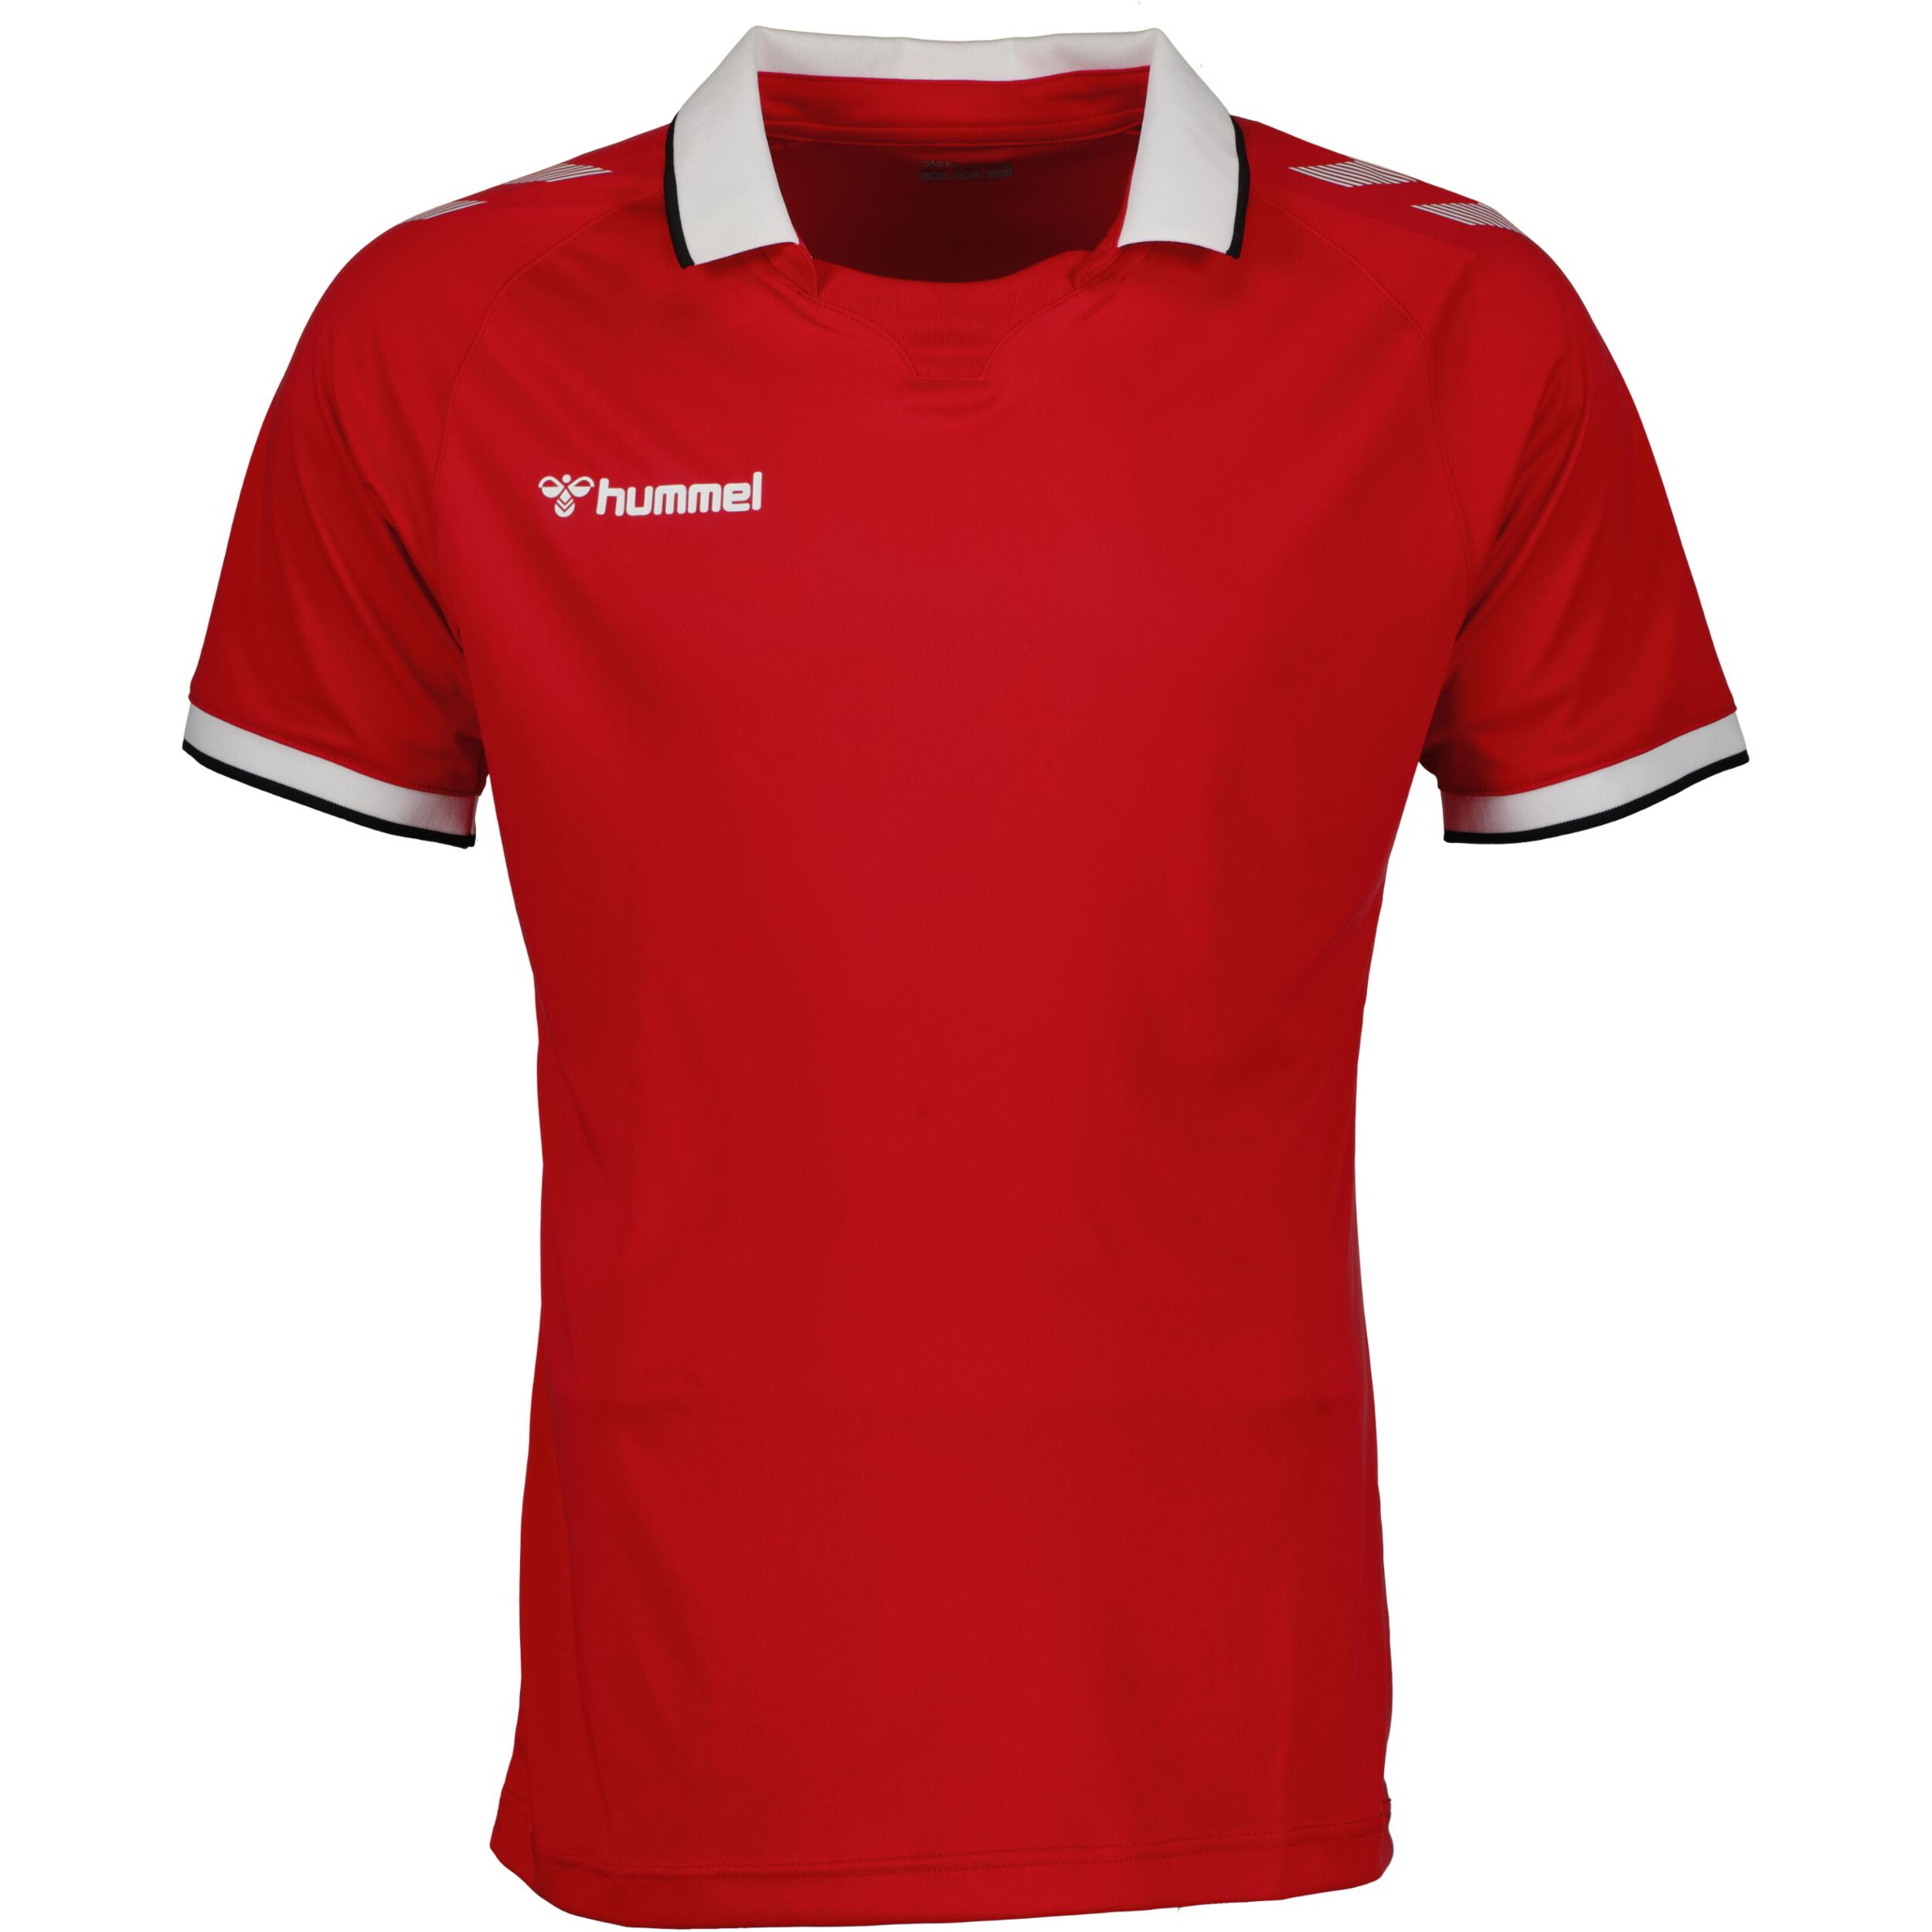 HUMMEL Impact jersey for men, great for football, in true red/white